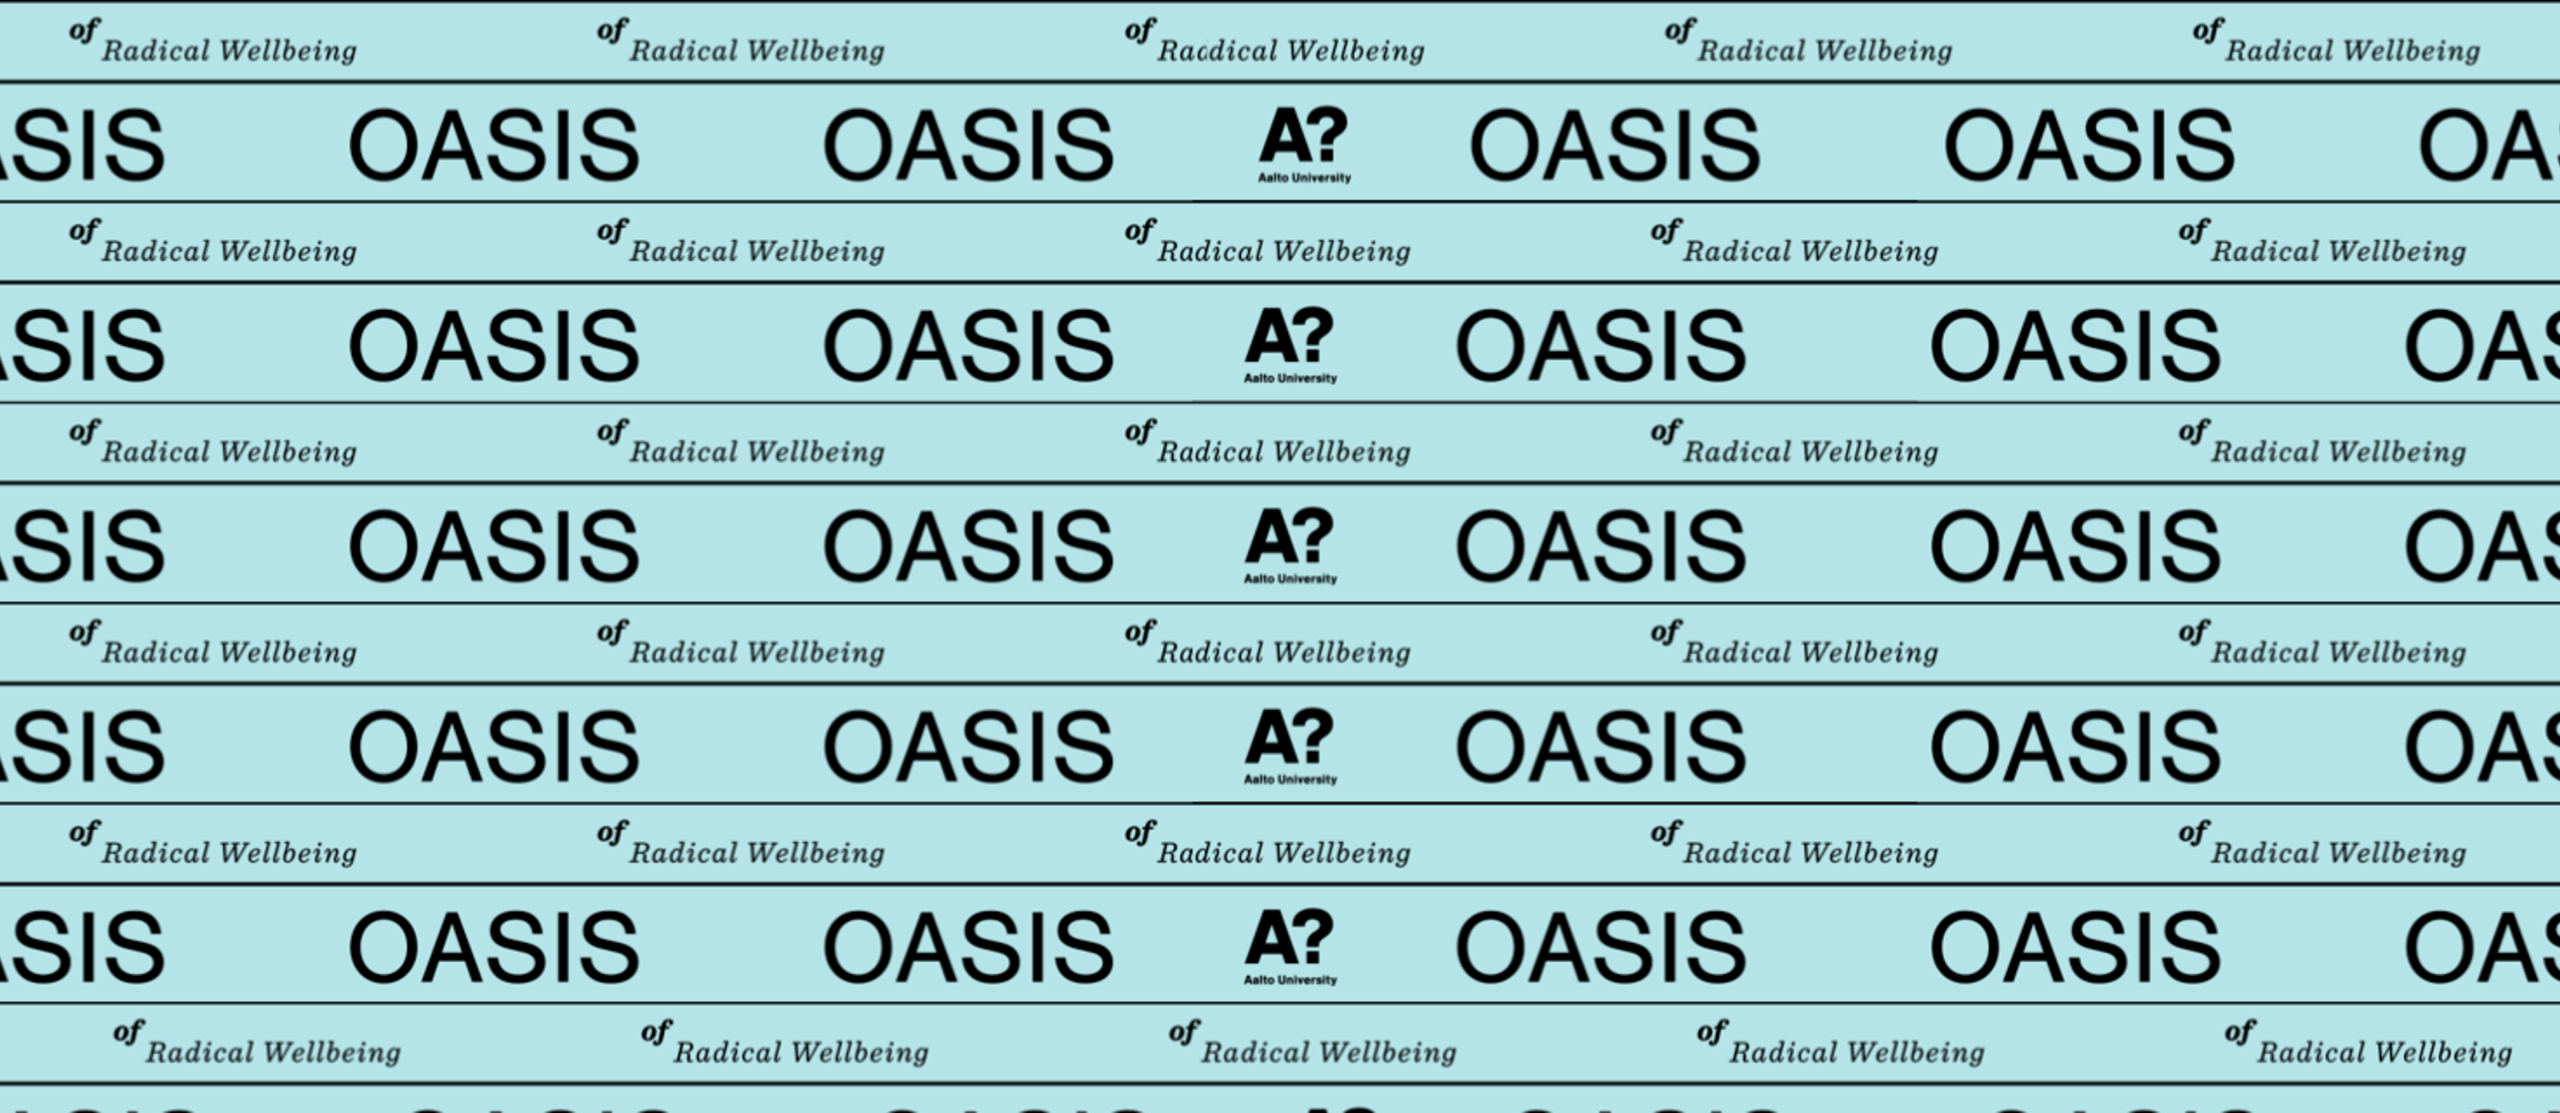 Aalto and Oasis logos